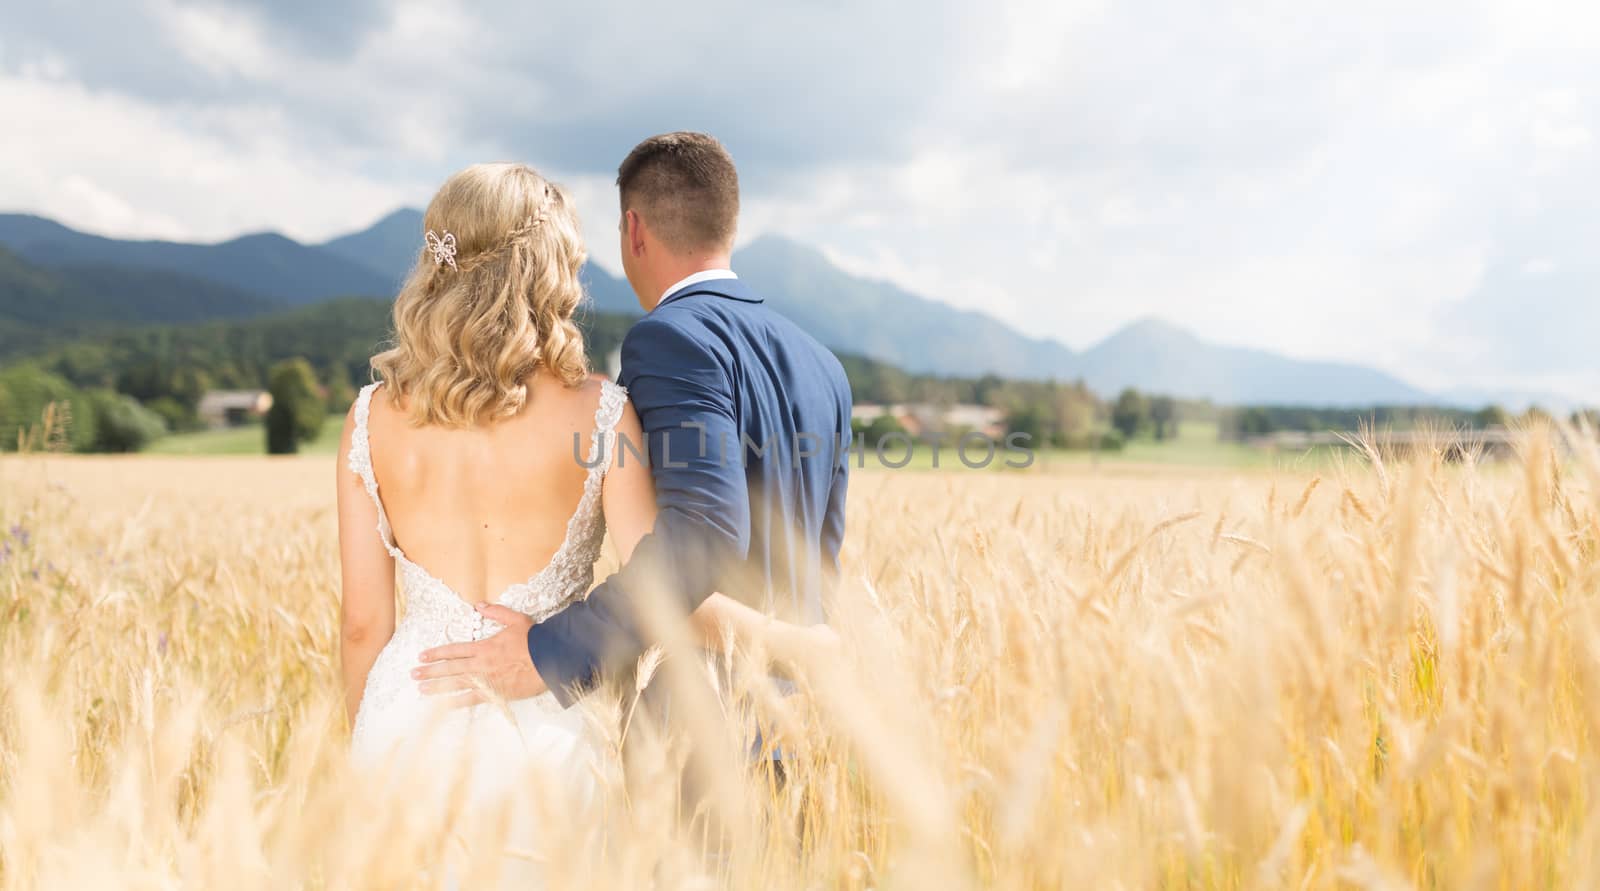 Rear view of groom huging bride tenderly in wheat field somewhere in Slovenian countryside. Caucasian happy romantic young couple celebrating their marriage.